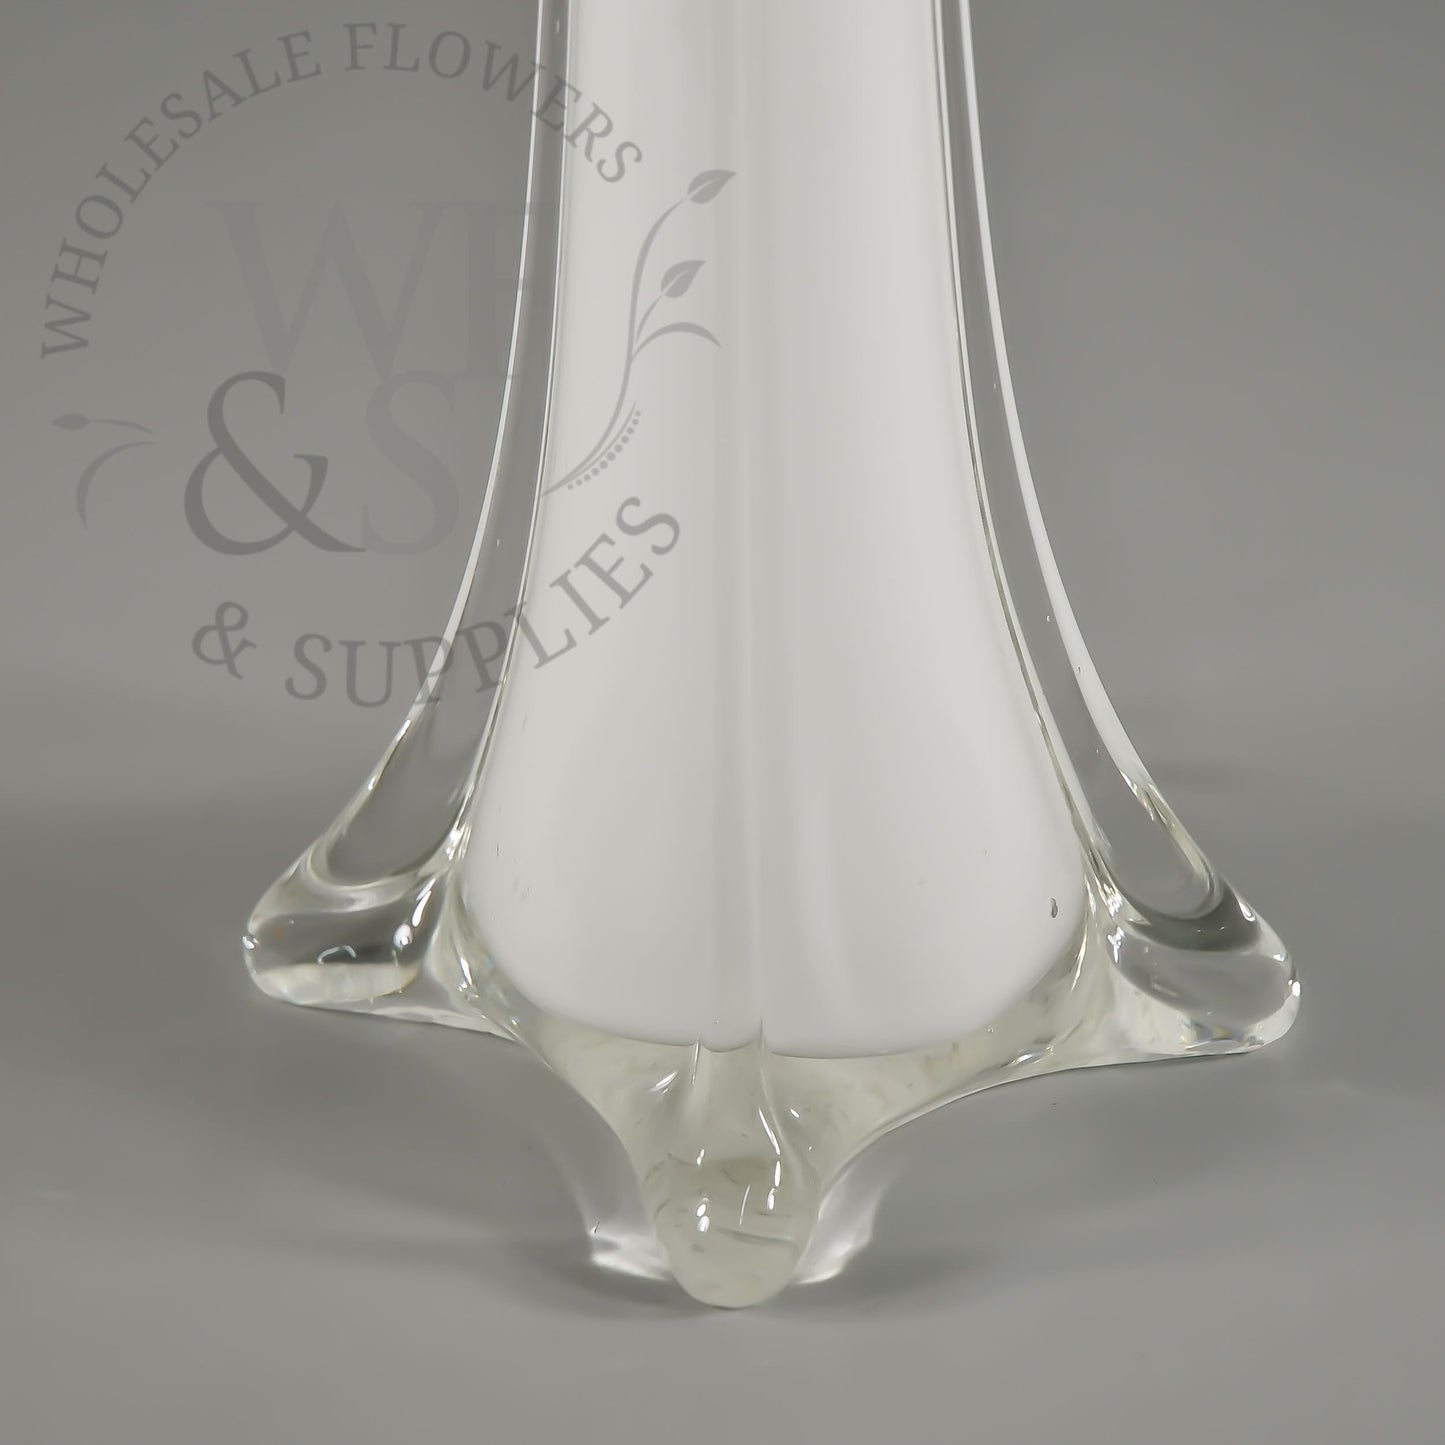 Glass Eiffel Tower Vases 20-inch in Clear, White, or Black. - Wholesale  Flowers and Supplies